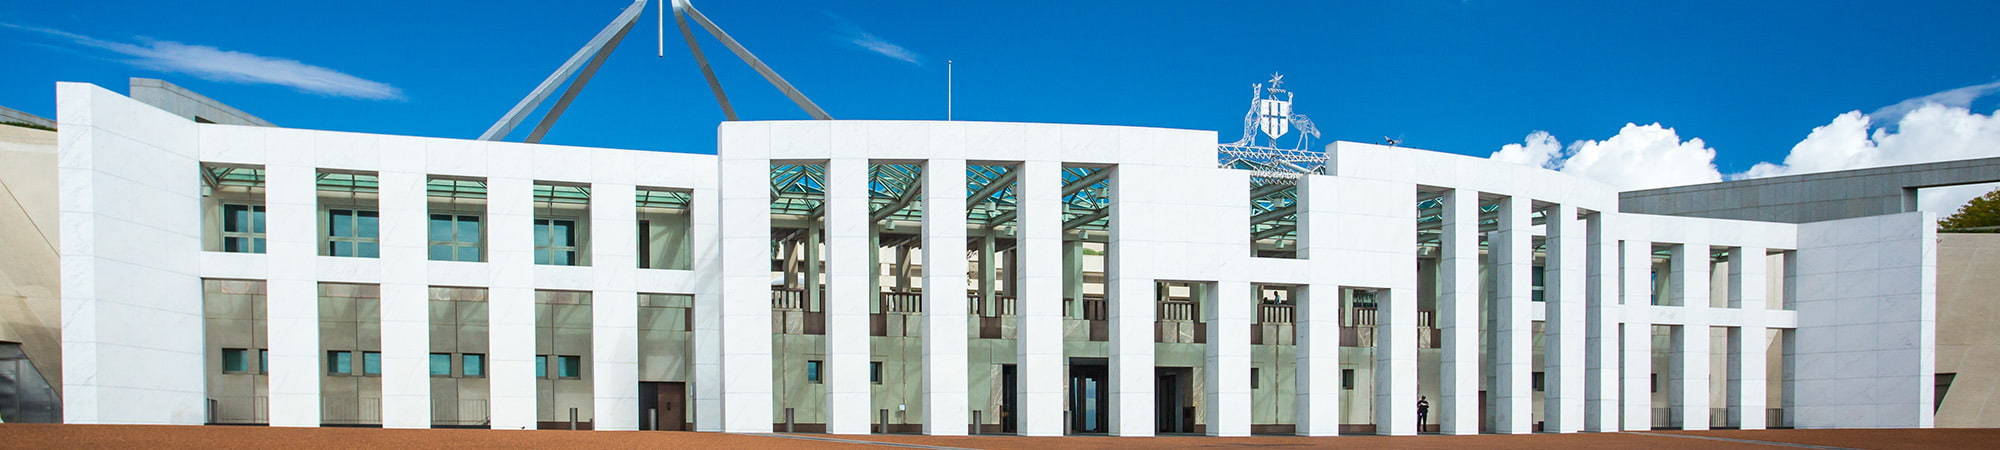 Parliament House Canberra where Vertical Scope Group help fill jobs in Canberra and provide security cleared ICT and cyber security consulting services